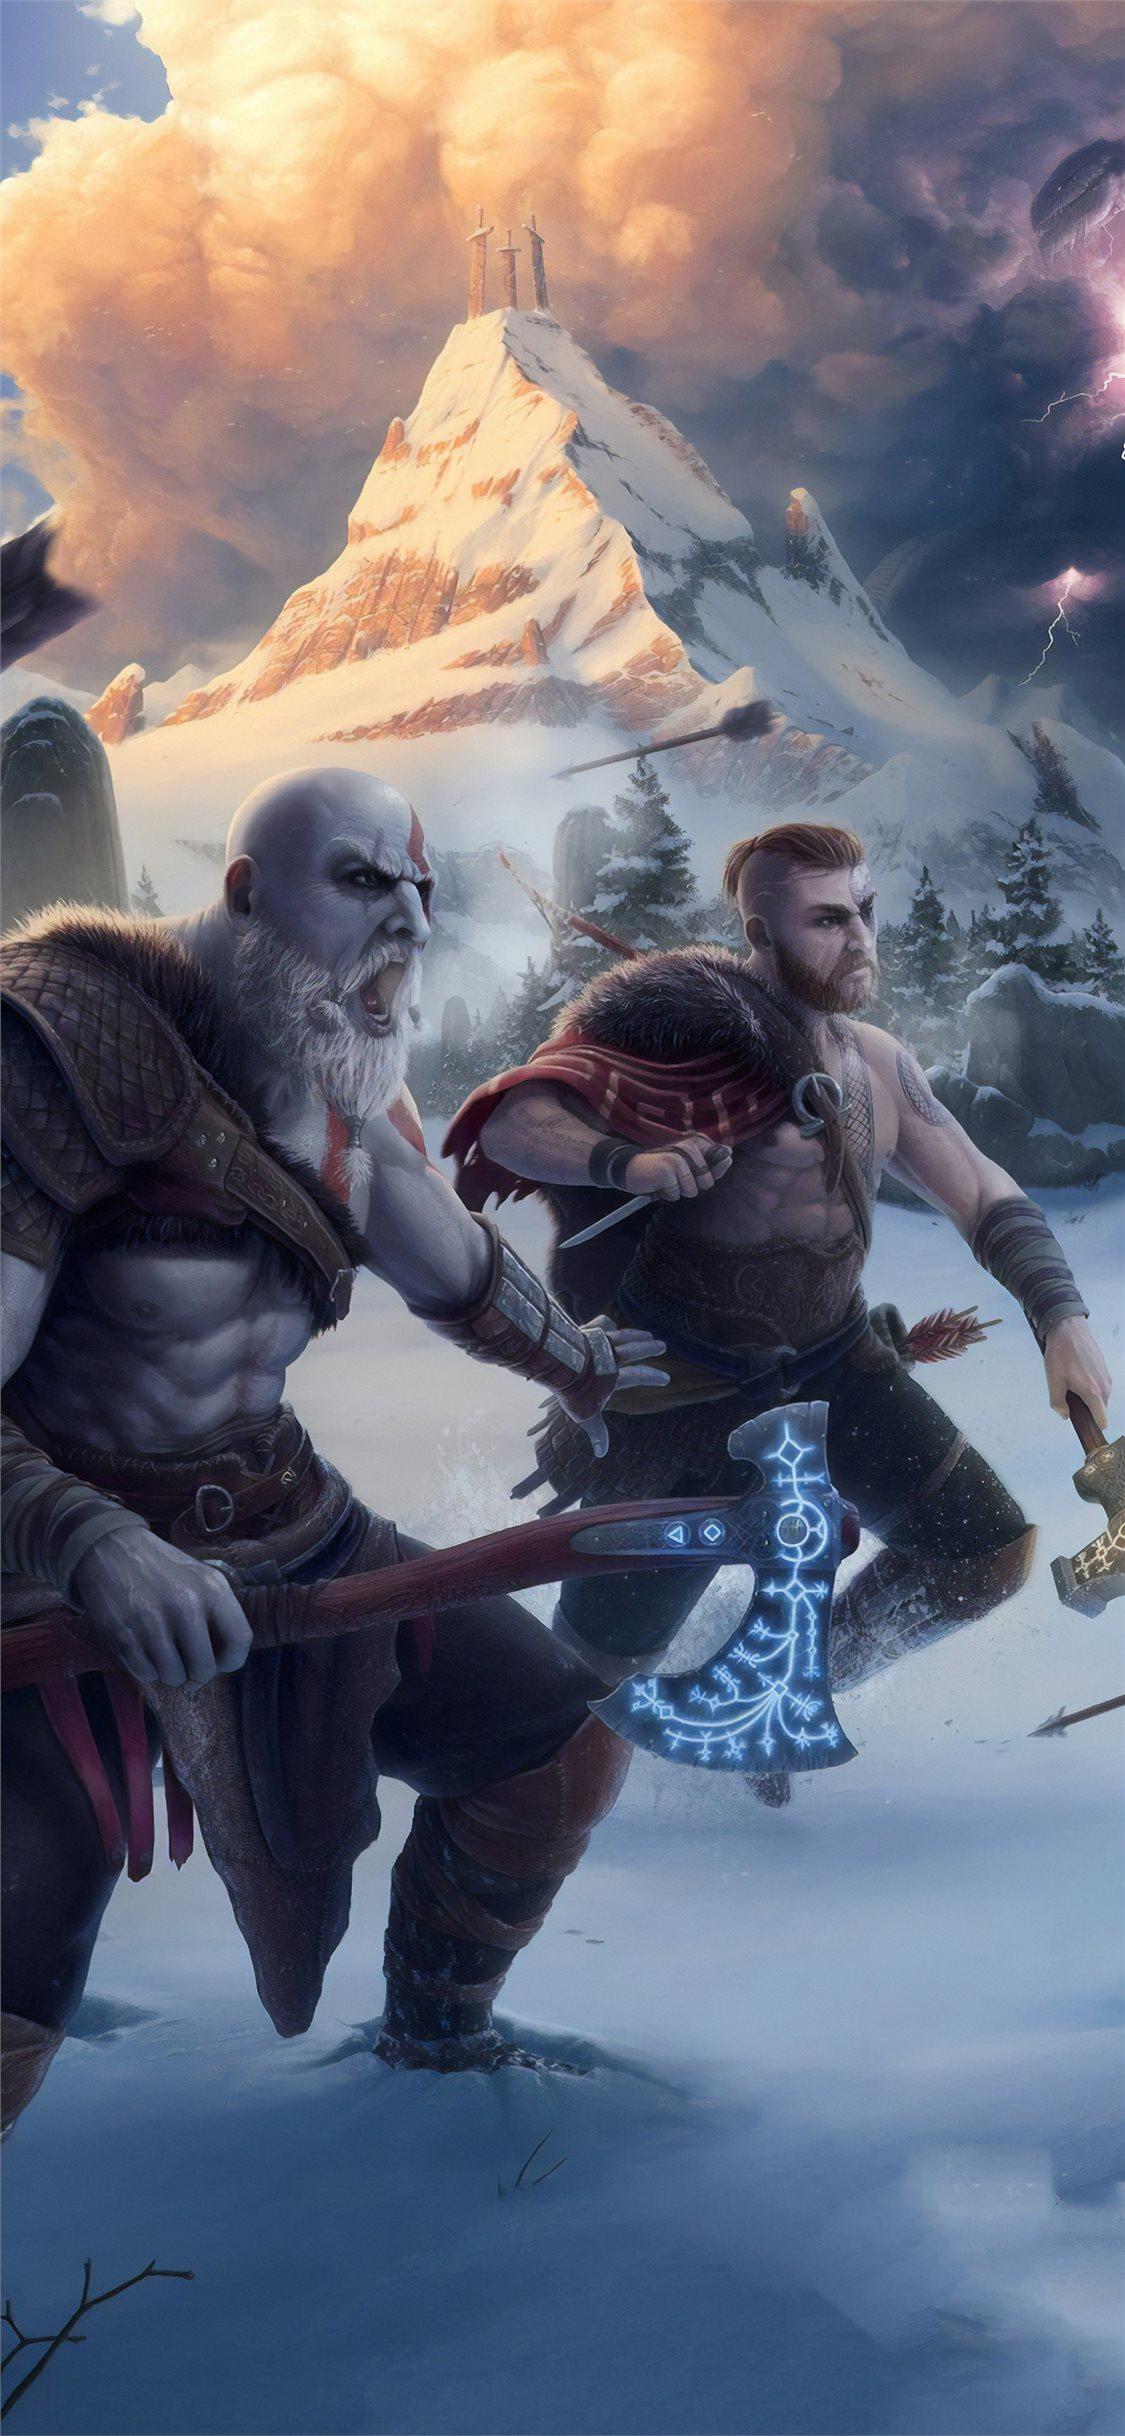 god ofwar 4 4k iPhone X Wallpapers Free Download